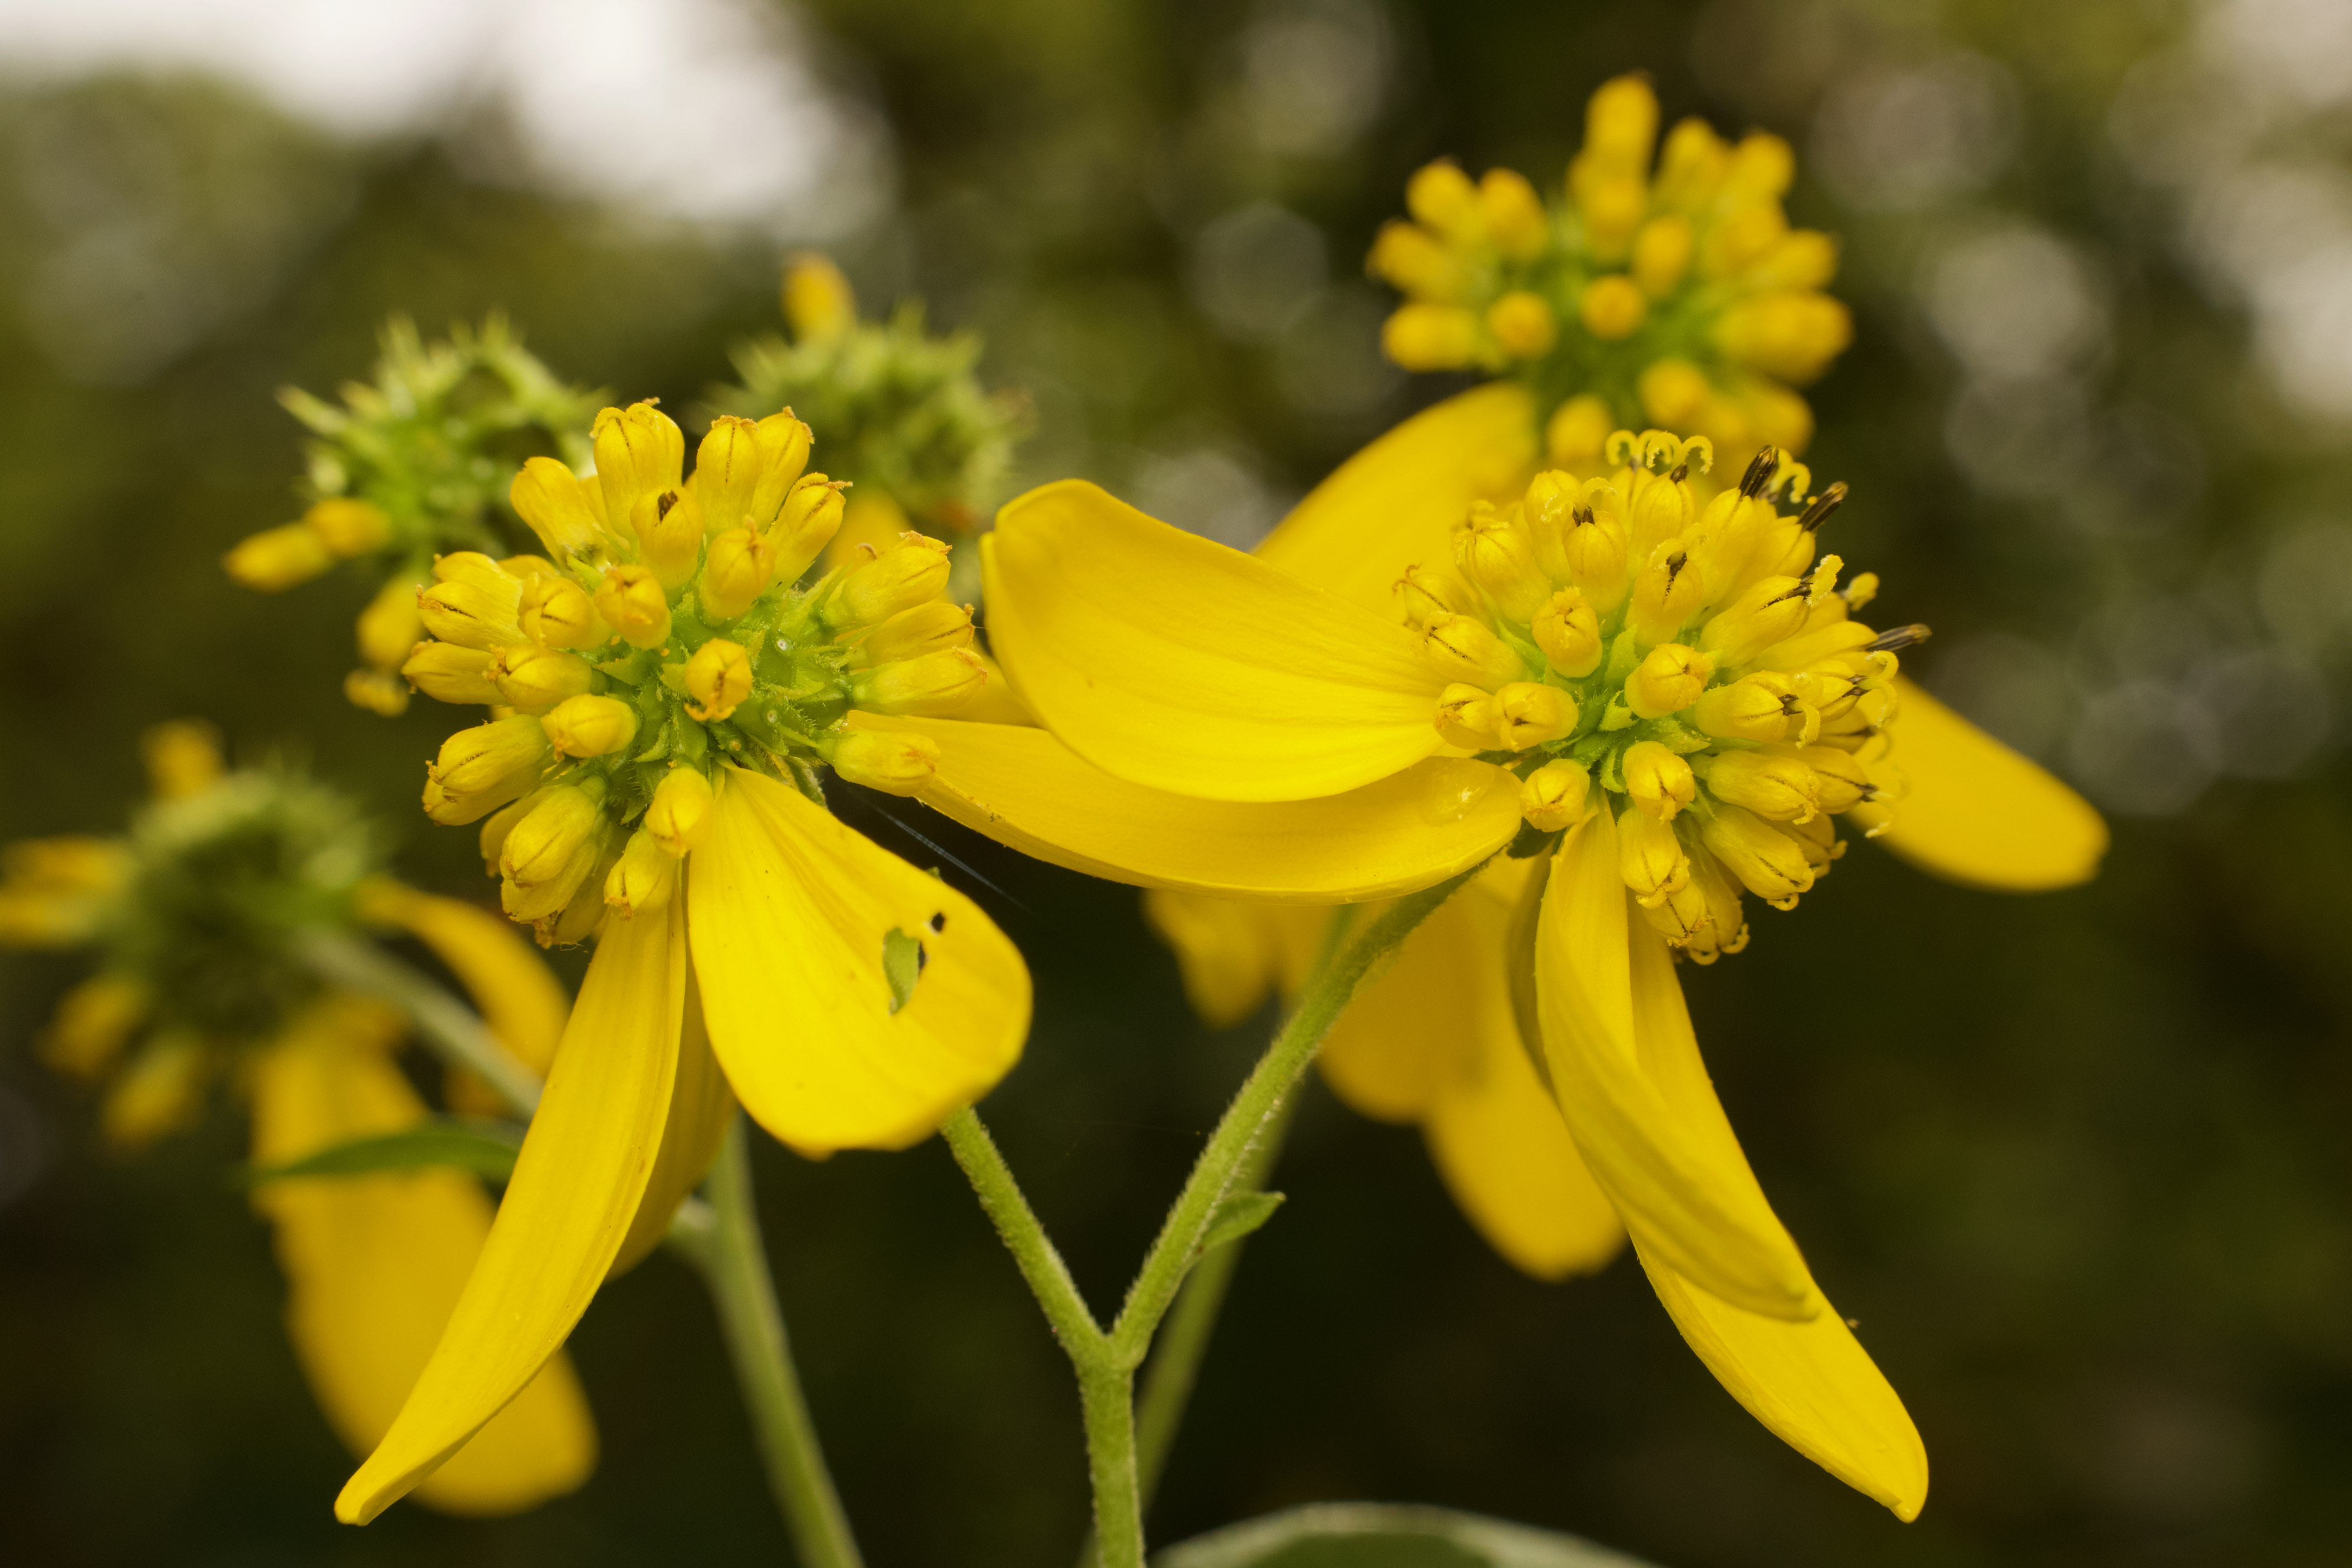 Small yellow flower clusters with drooping petals.